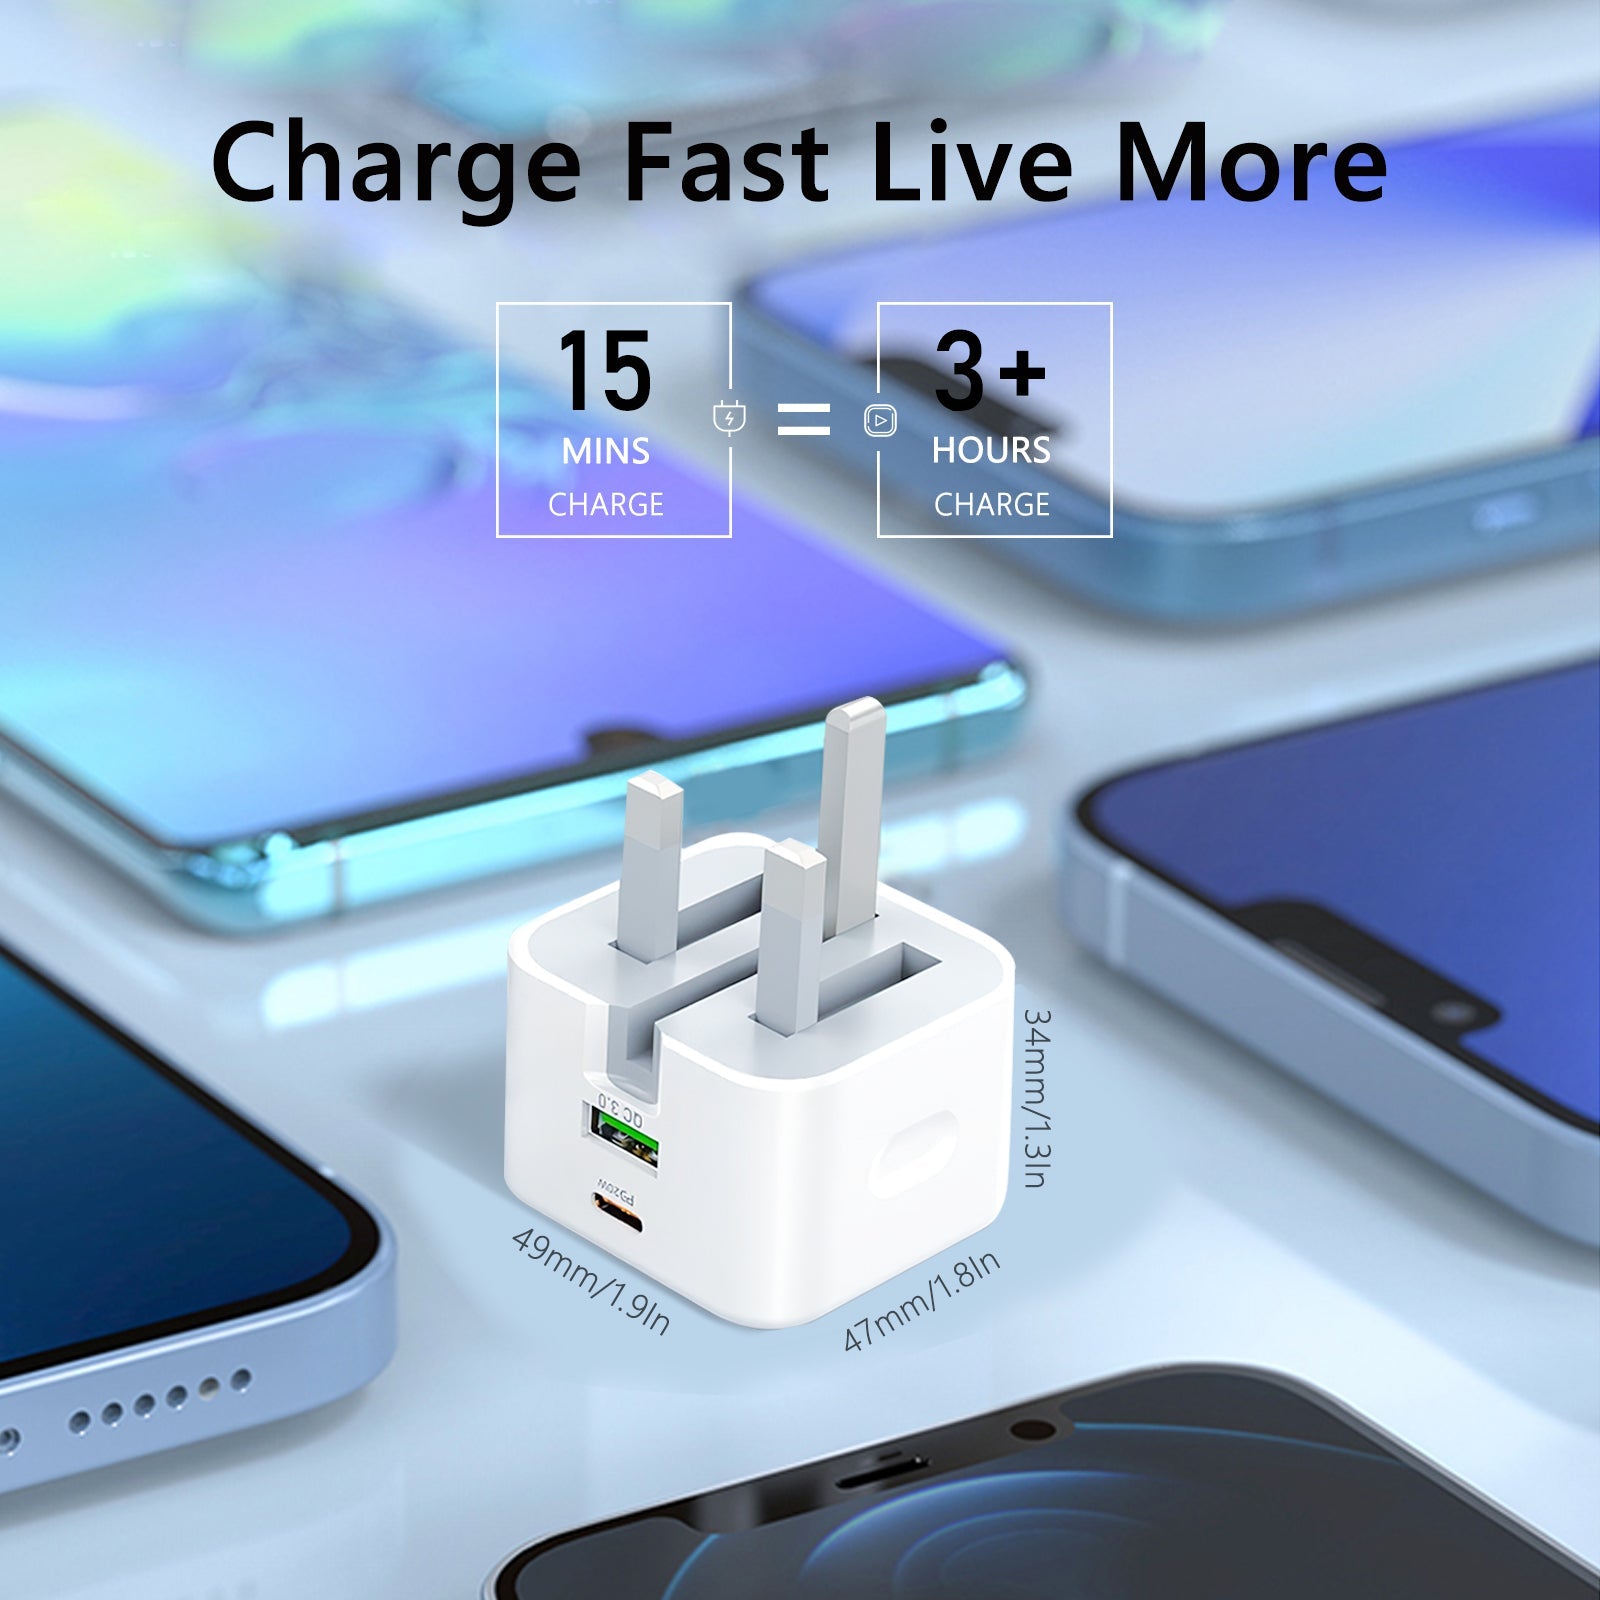 Mione Mic05 Multiport USB C 20W Charger Plug, Dual-Port Fast PD+QC 3.0 Tpye C Travel Power Adapter Compatible with Android, IOS&Tablet.